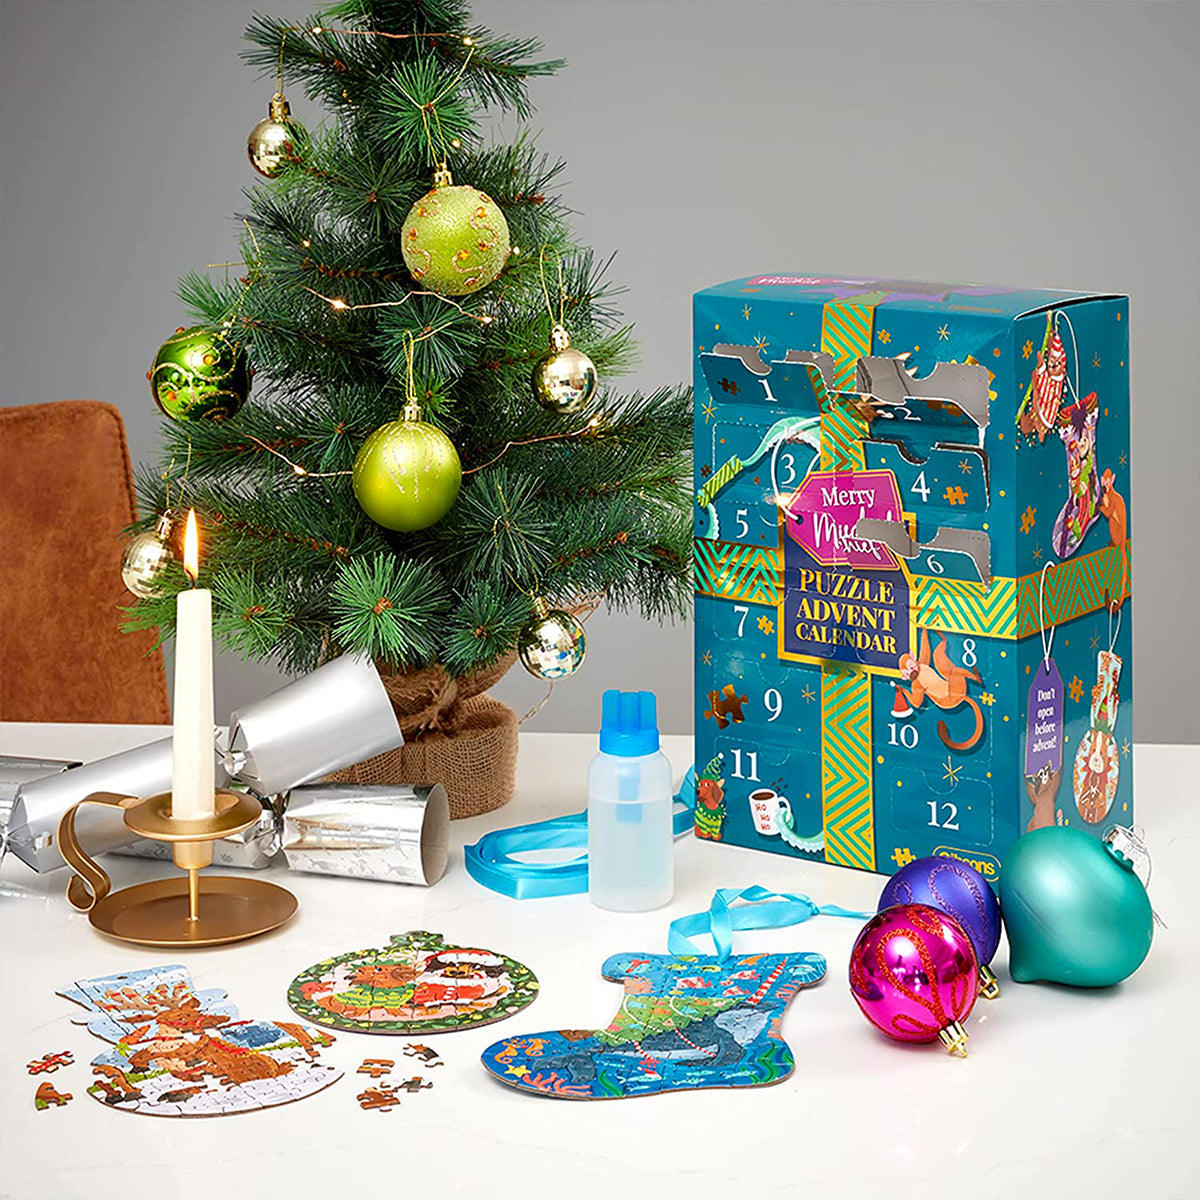 High quality –  24 door Christmas premium jigsaw puzzle advent calendar illustrated by Jess Bretherton. 